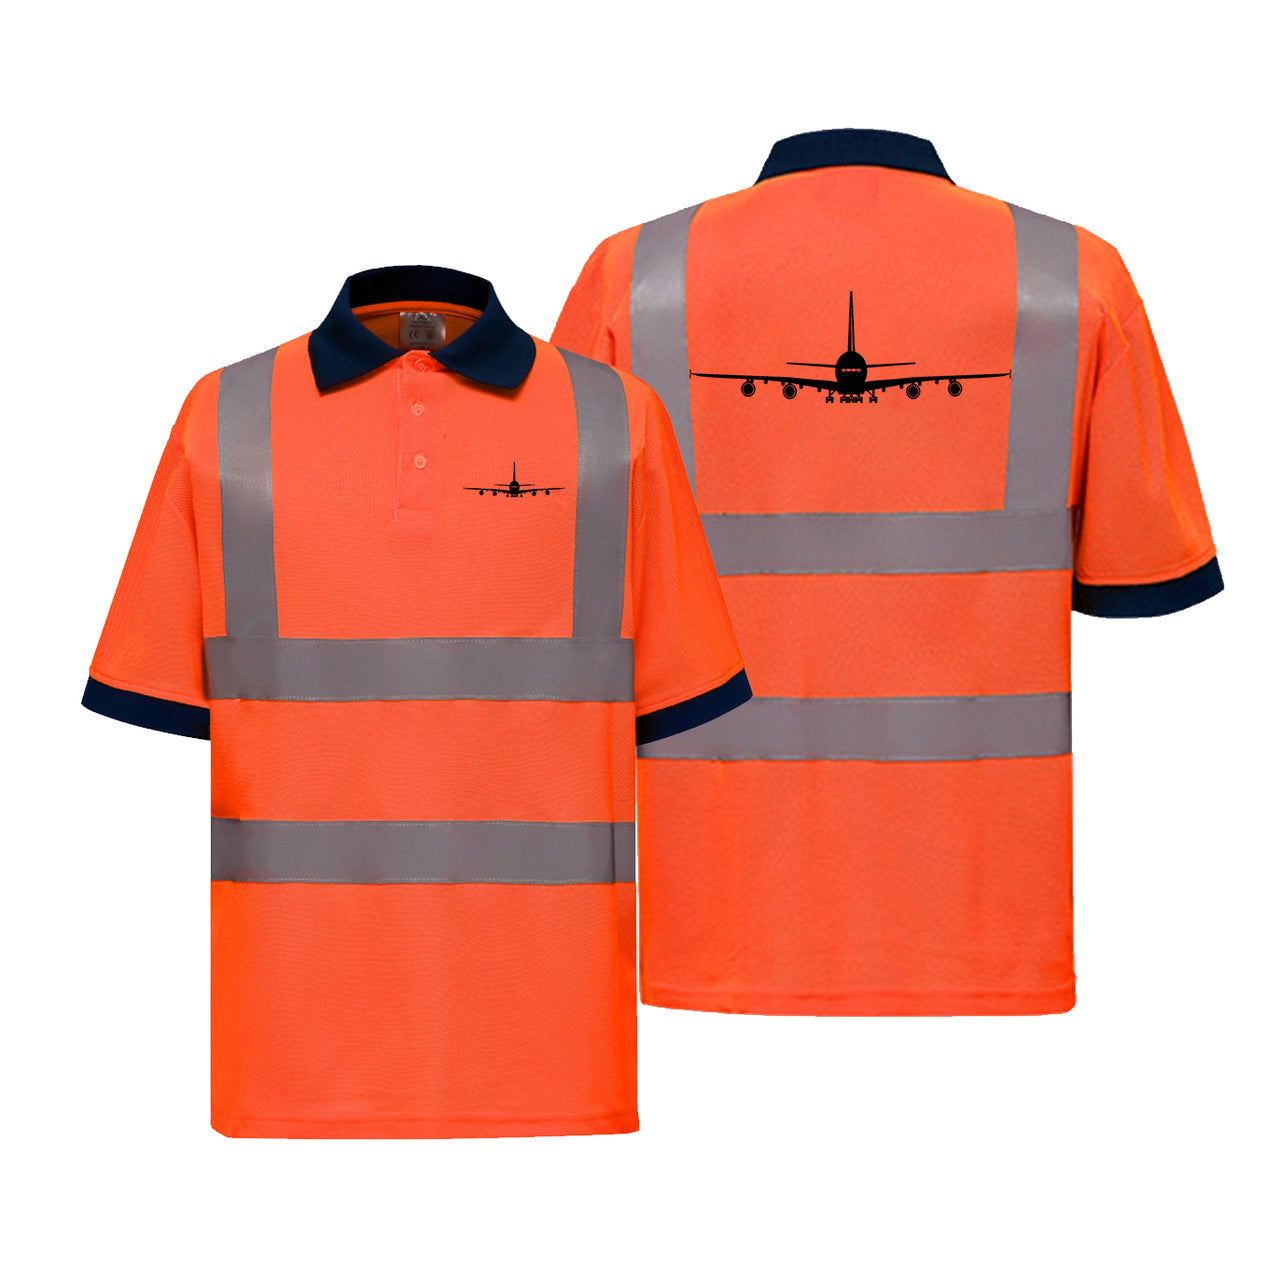 Airbus A380 Silhouette Designed Reflective Polo T-Shirts